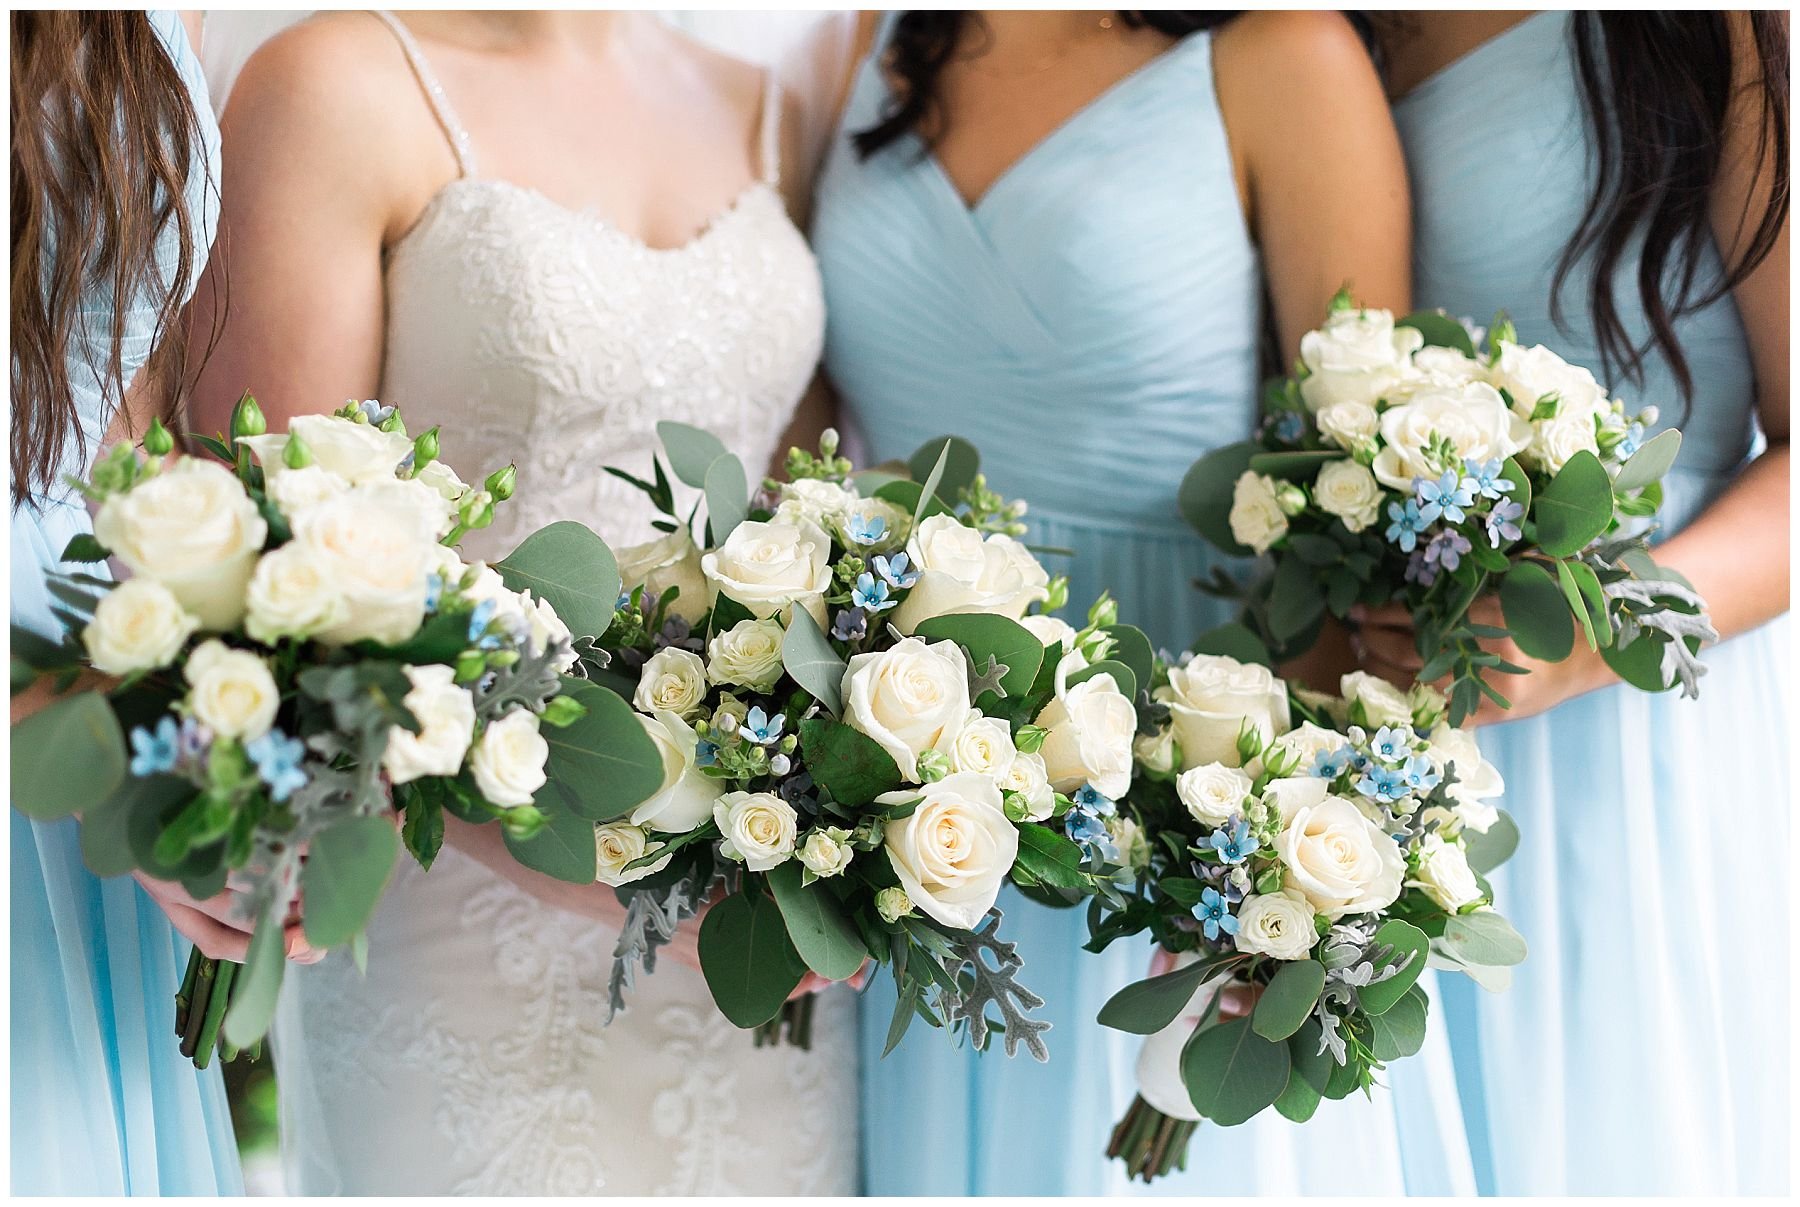 Bridesmaids in pastel blue dresses on a white porch